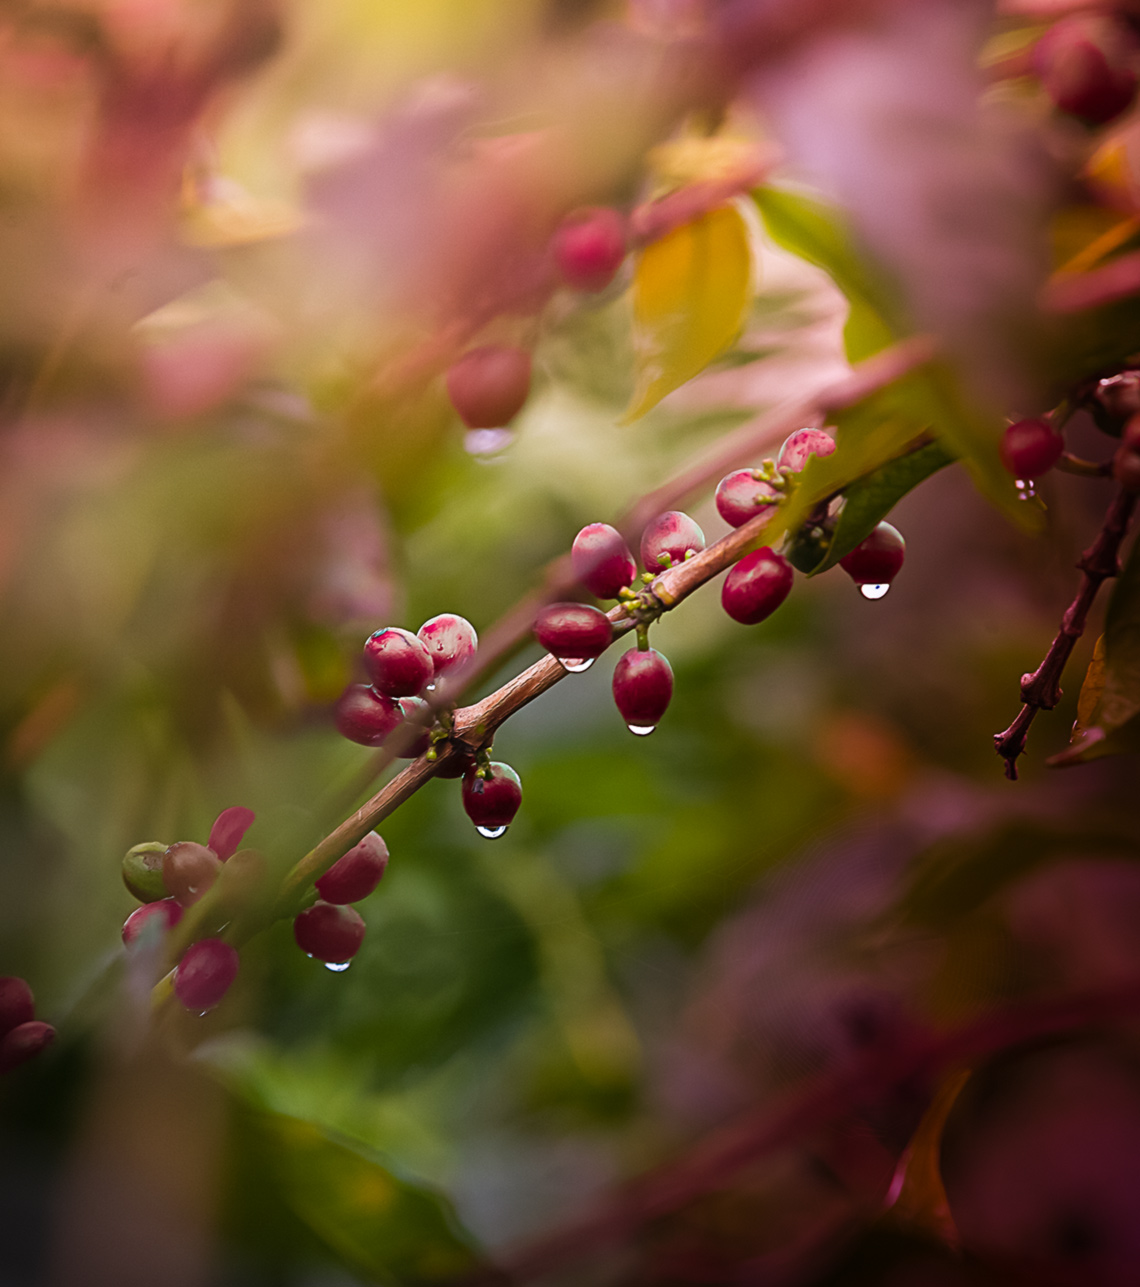 Ripe coffee cherries on trees. Agriculture photography